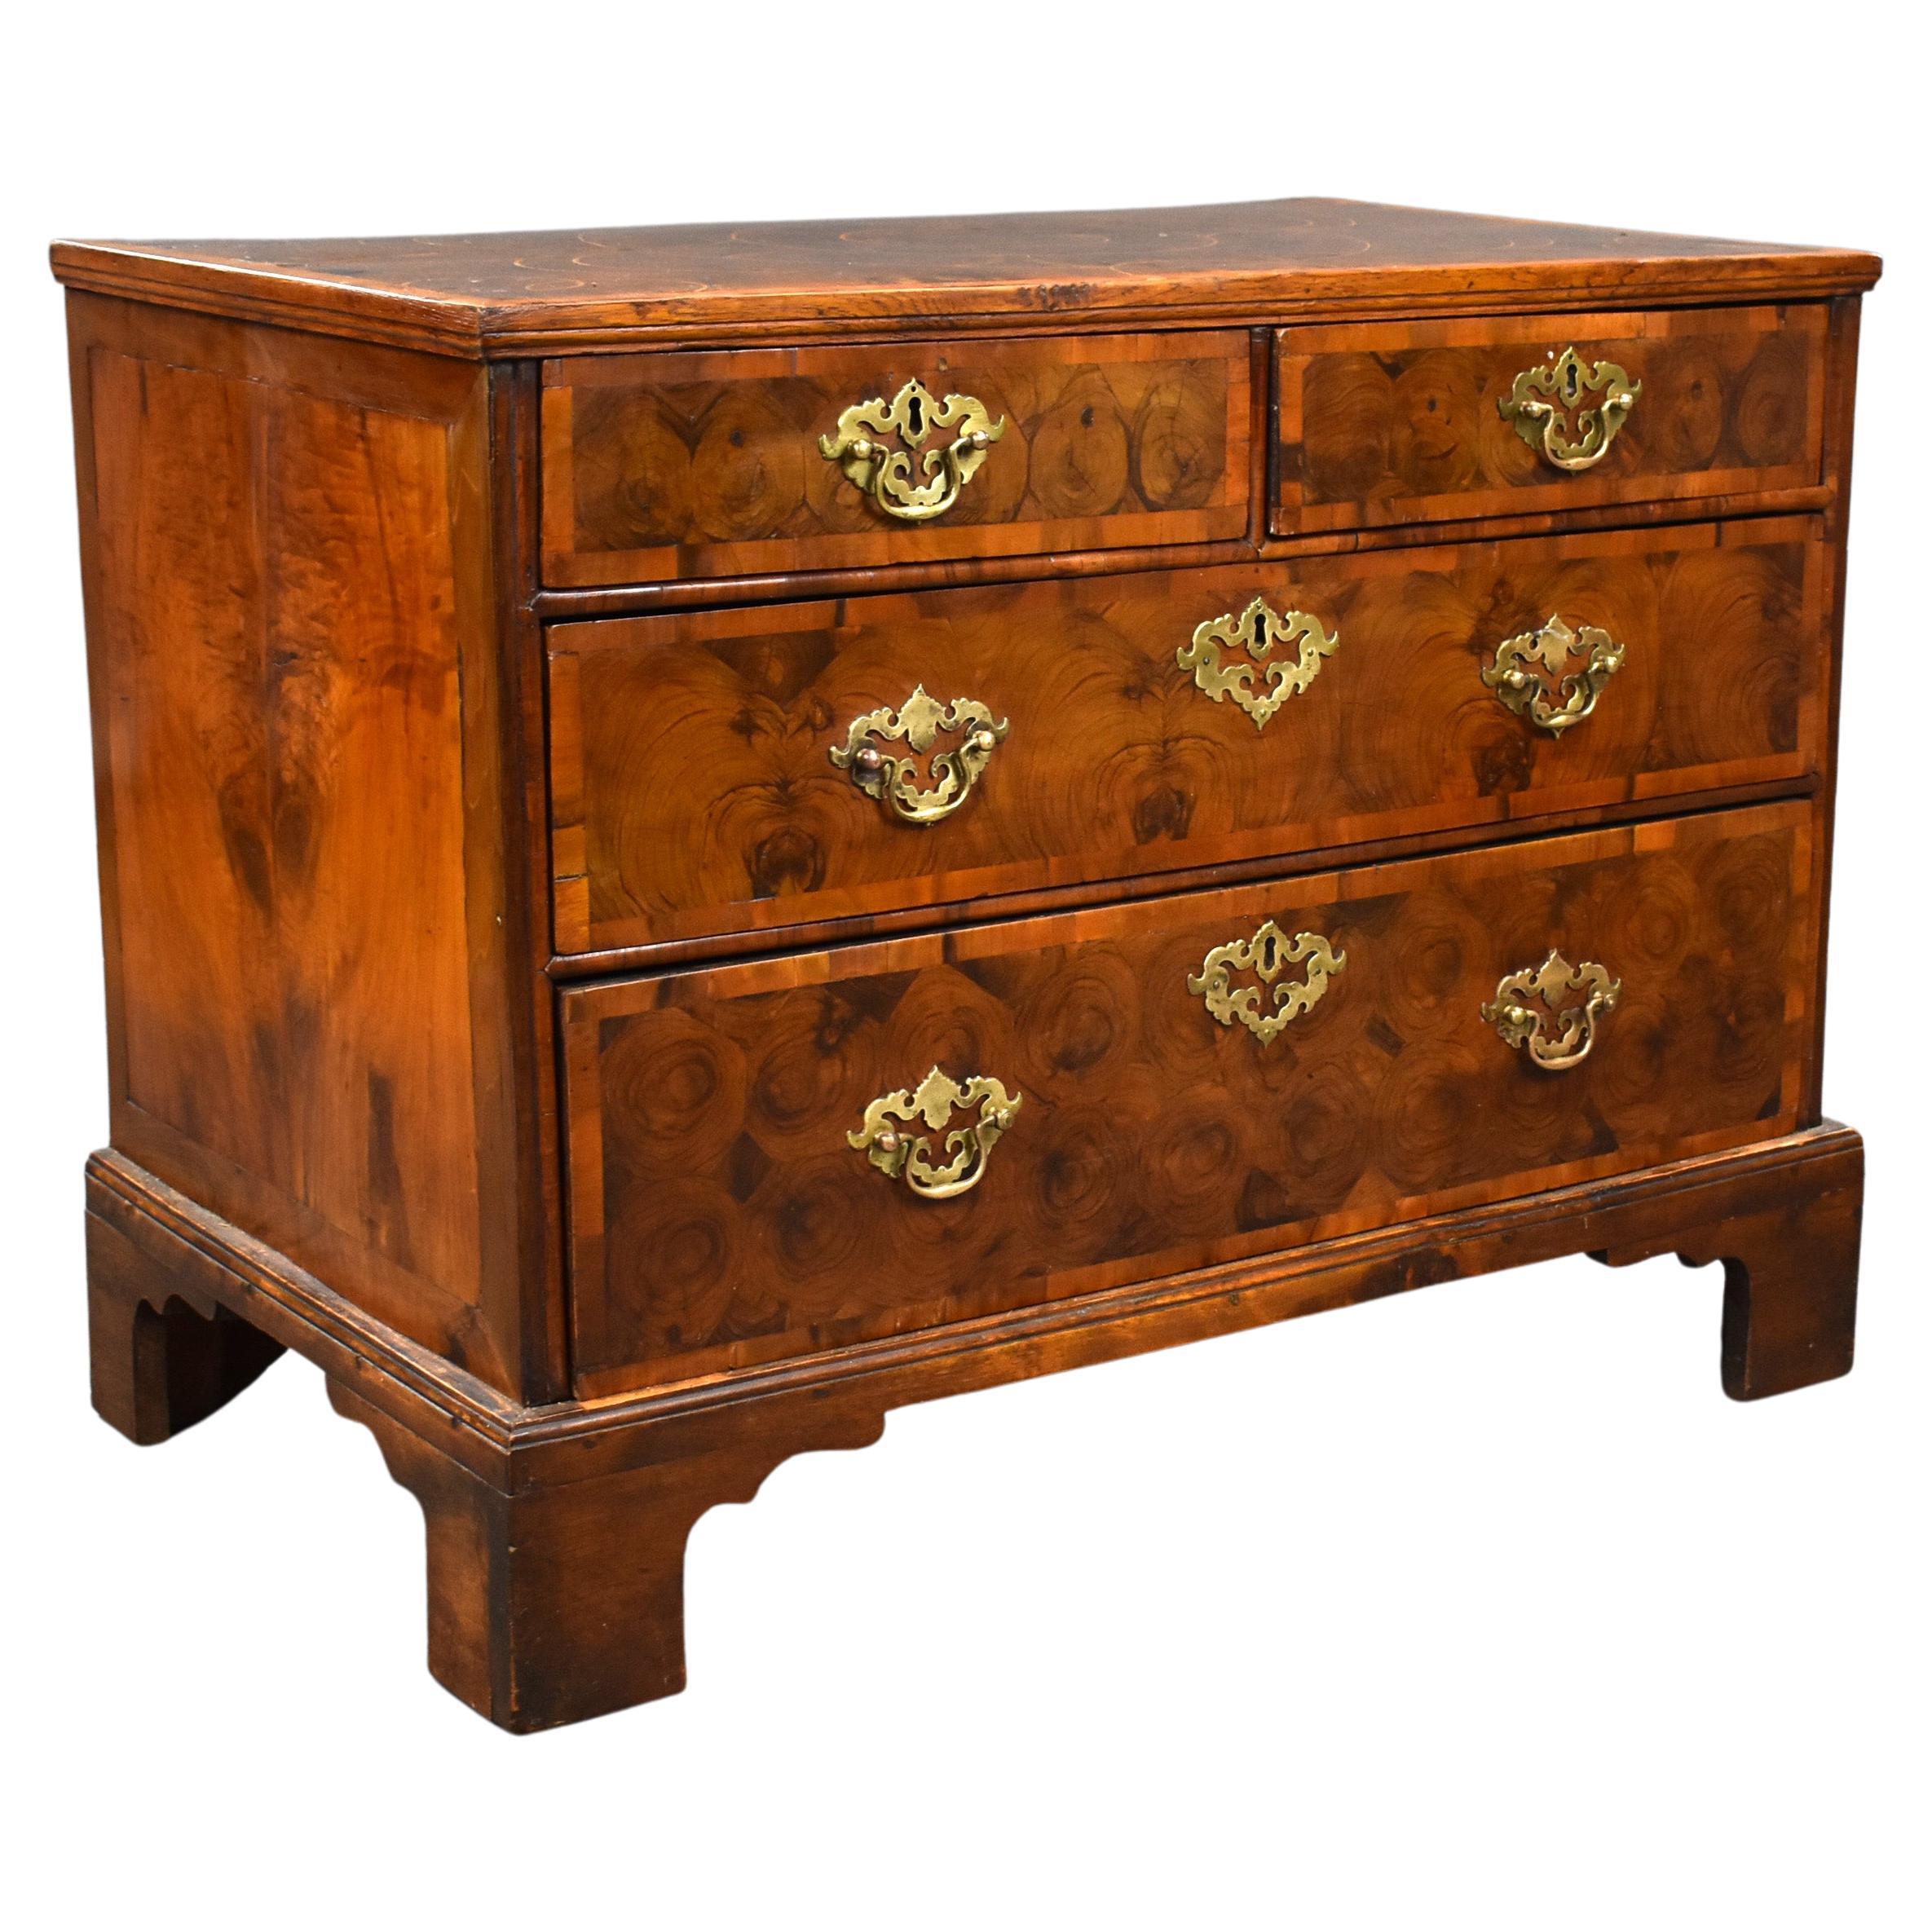 Early 18th Century English Walnut Oyster Veneer Chest of Drawers For Sale